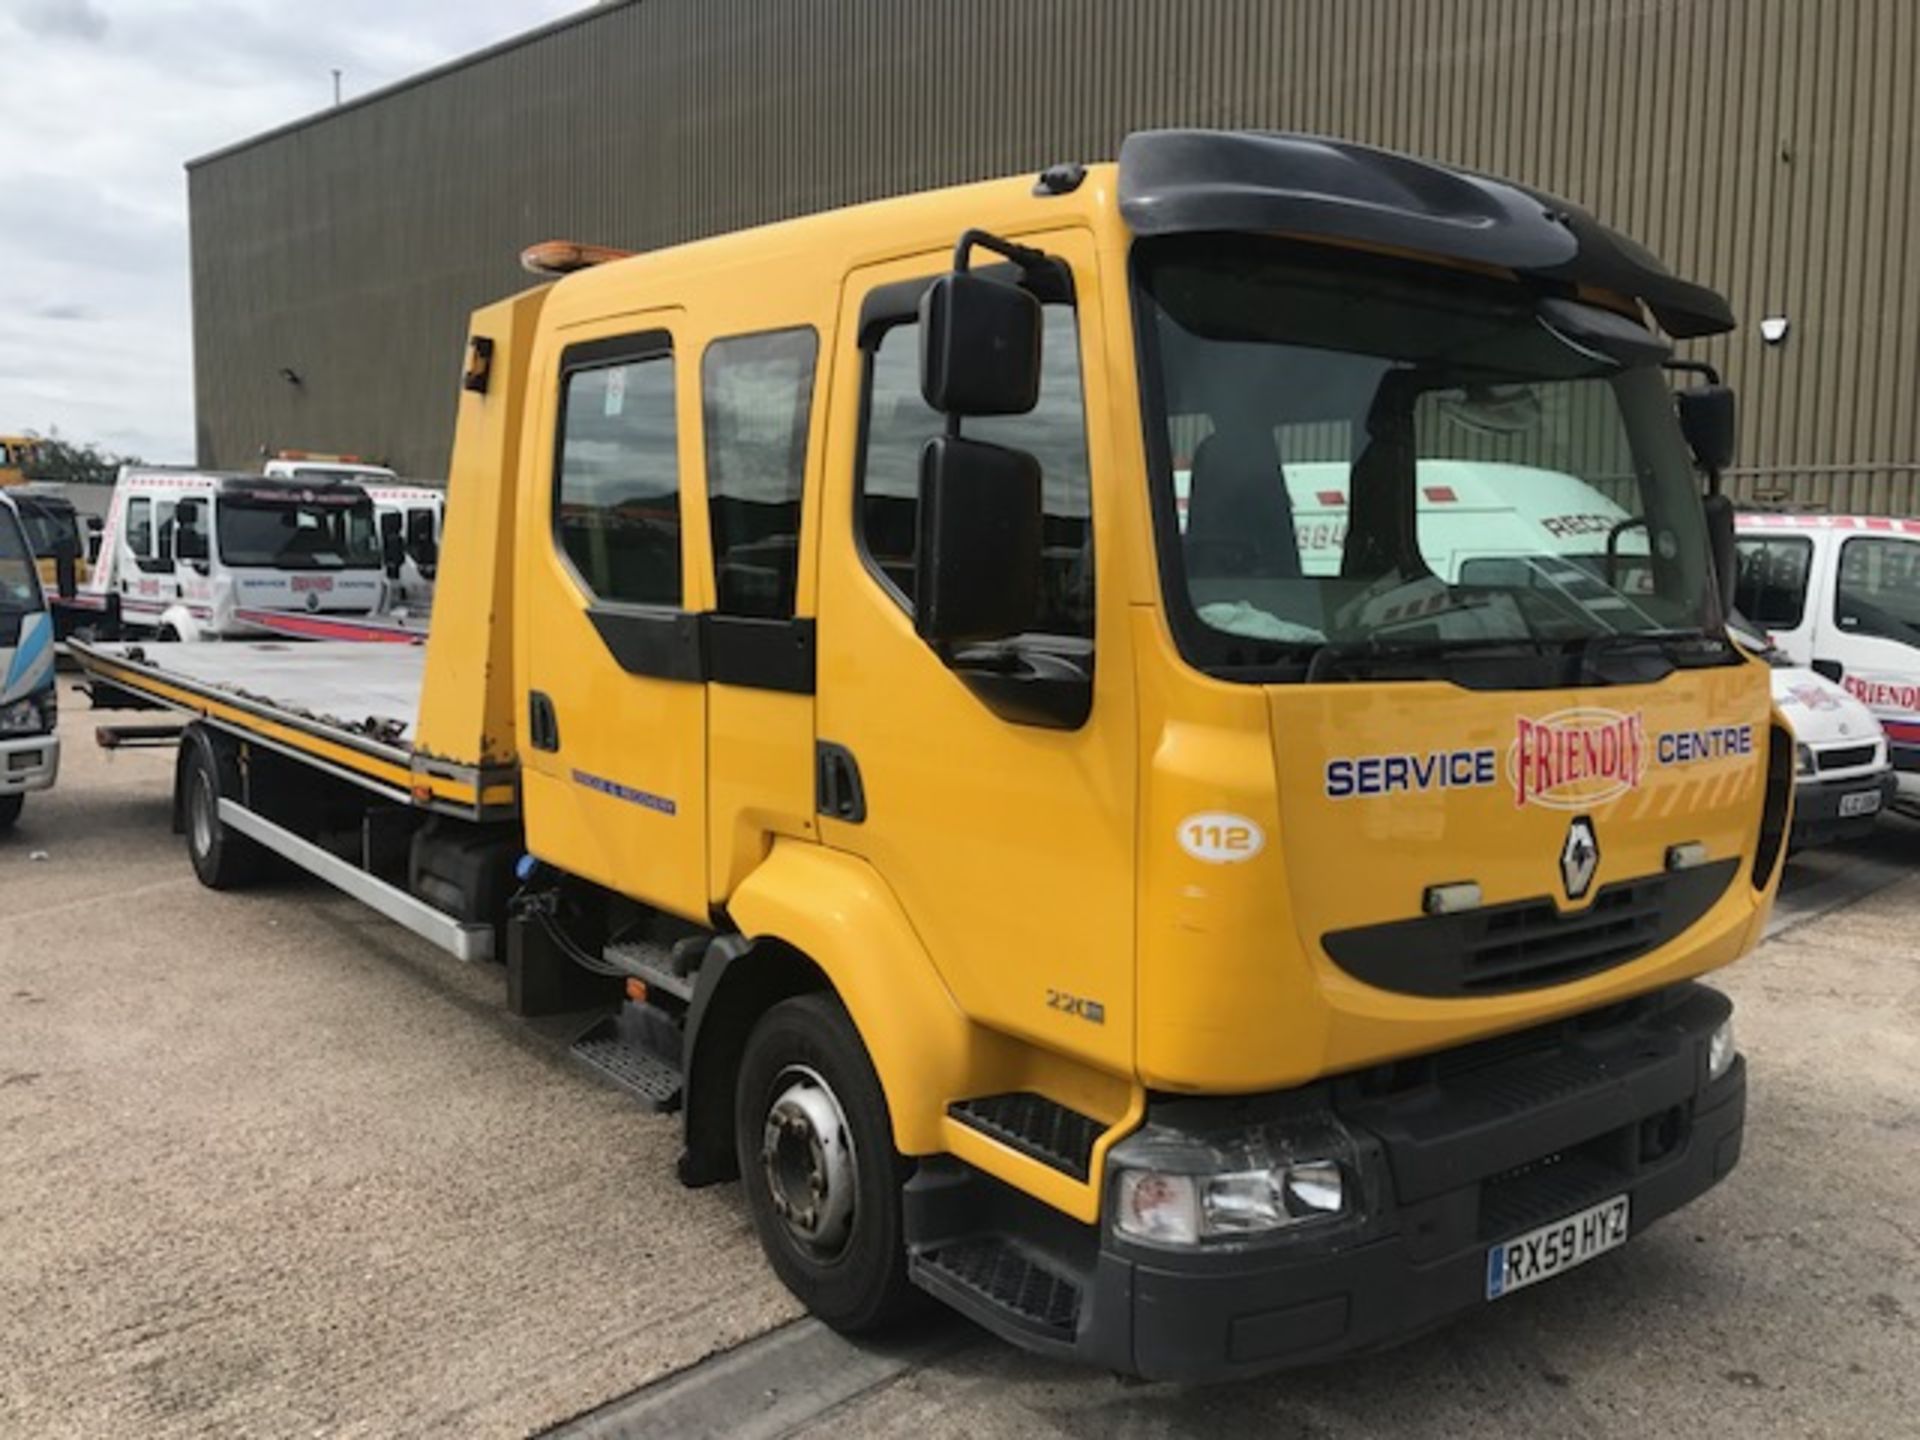 2010 Renault Midlum 220 DXI 12T crew cab complete with spec lift, J&J Conversions body and winch Bed